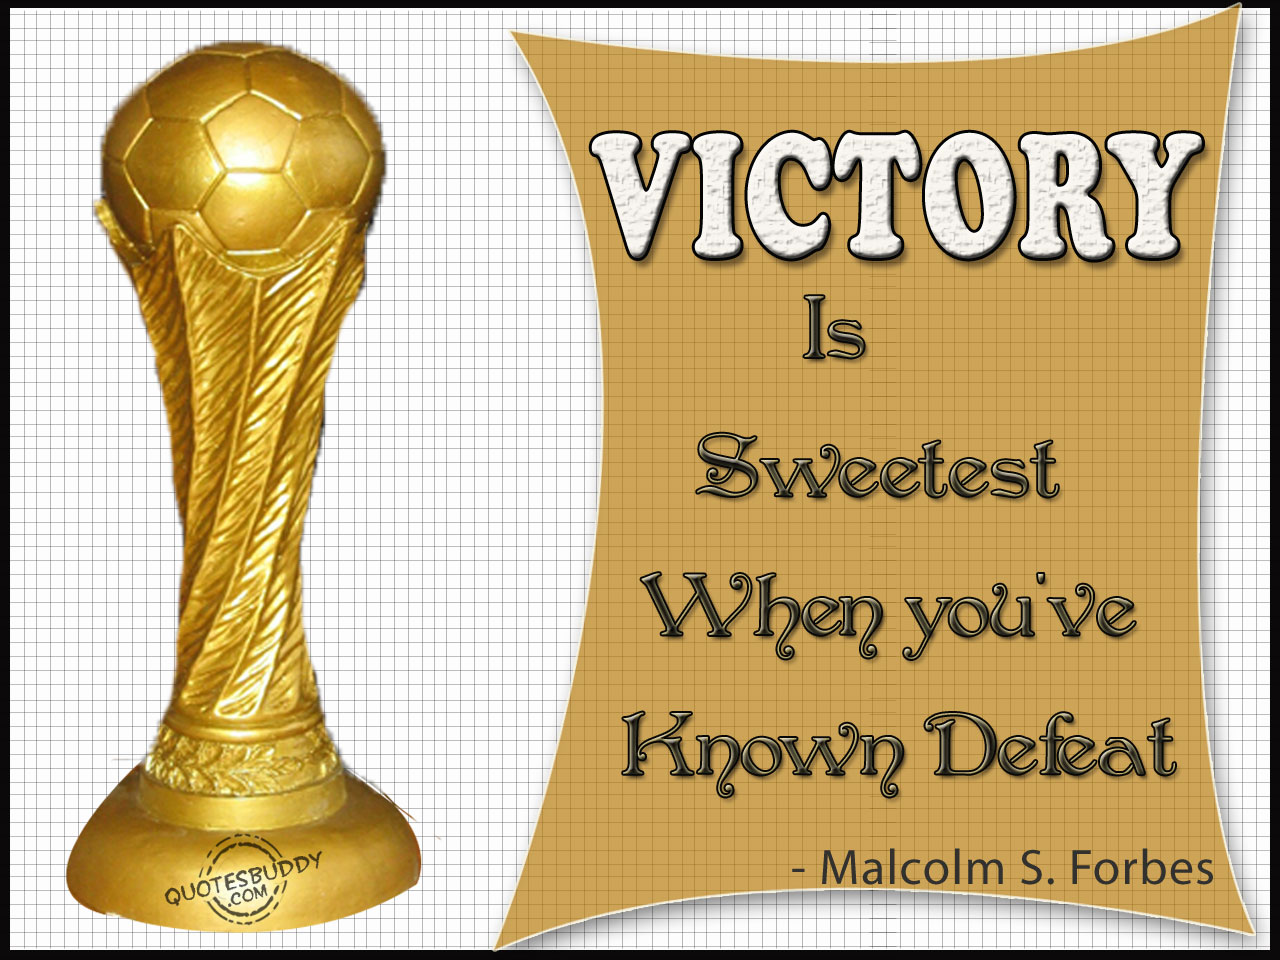 Victory is sweetest when you've known defeat. Malcolm S. Forbes